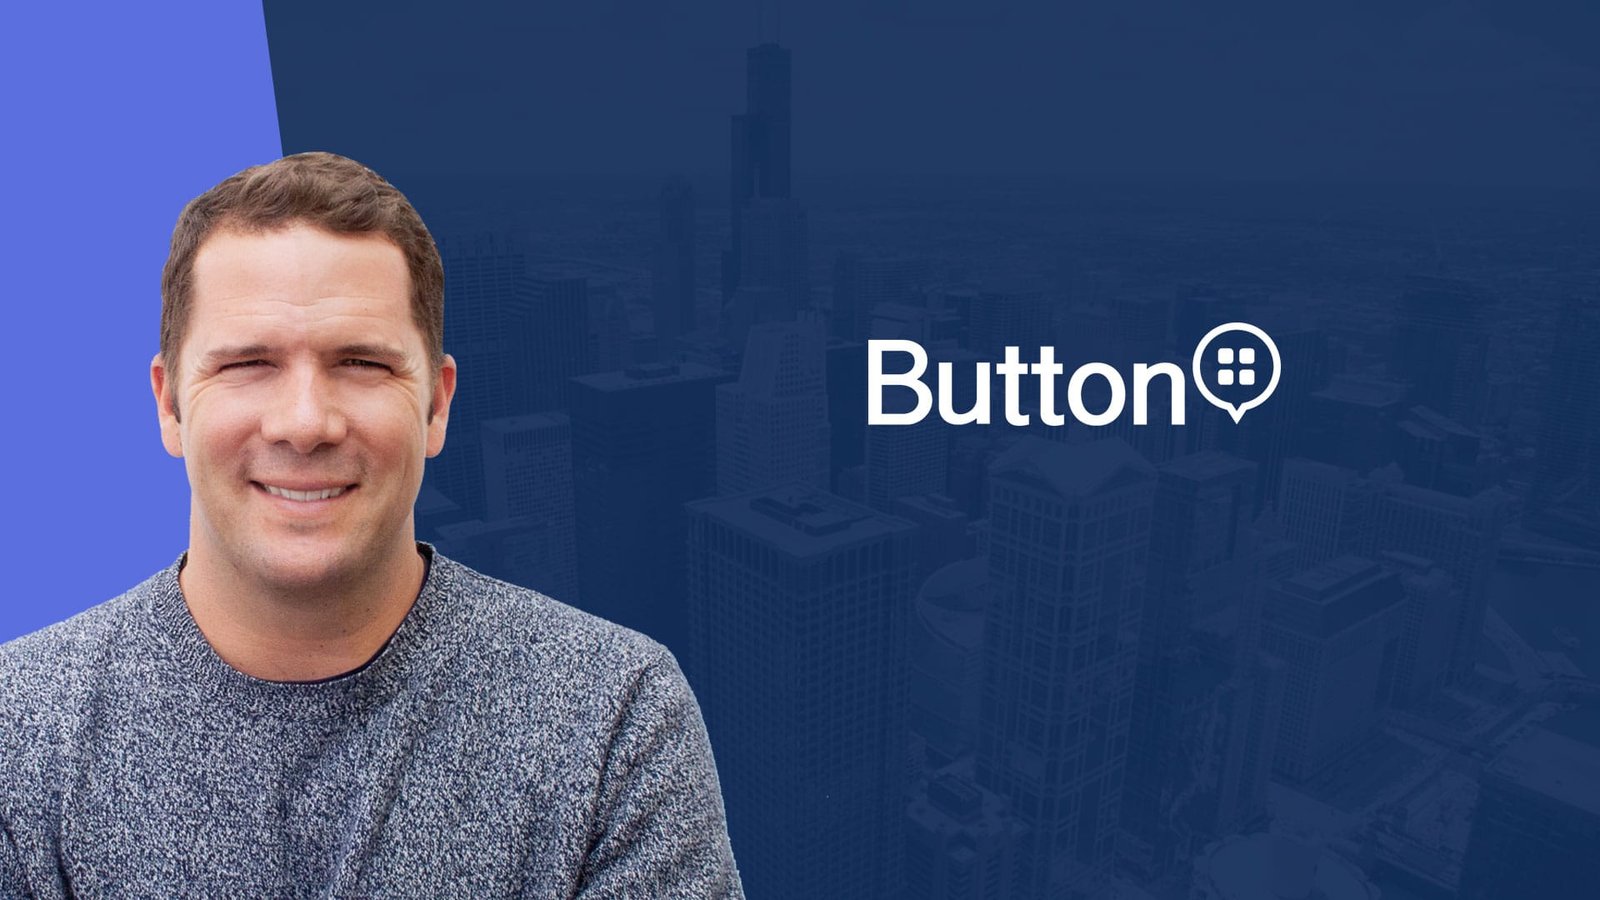 Martech Interview with the Co-Founder and CEO, Button – Michael Jaconi